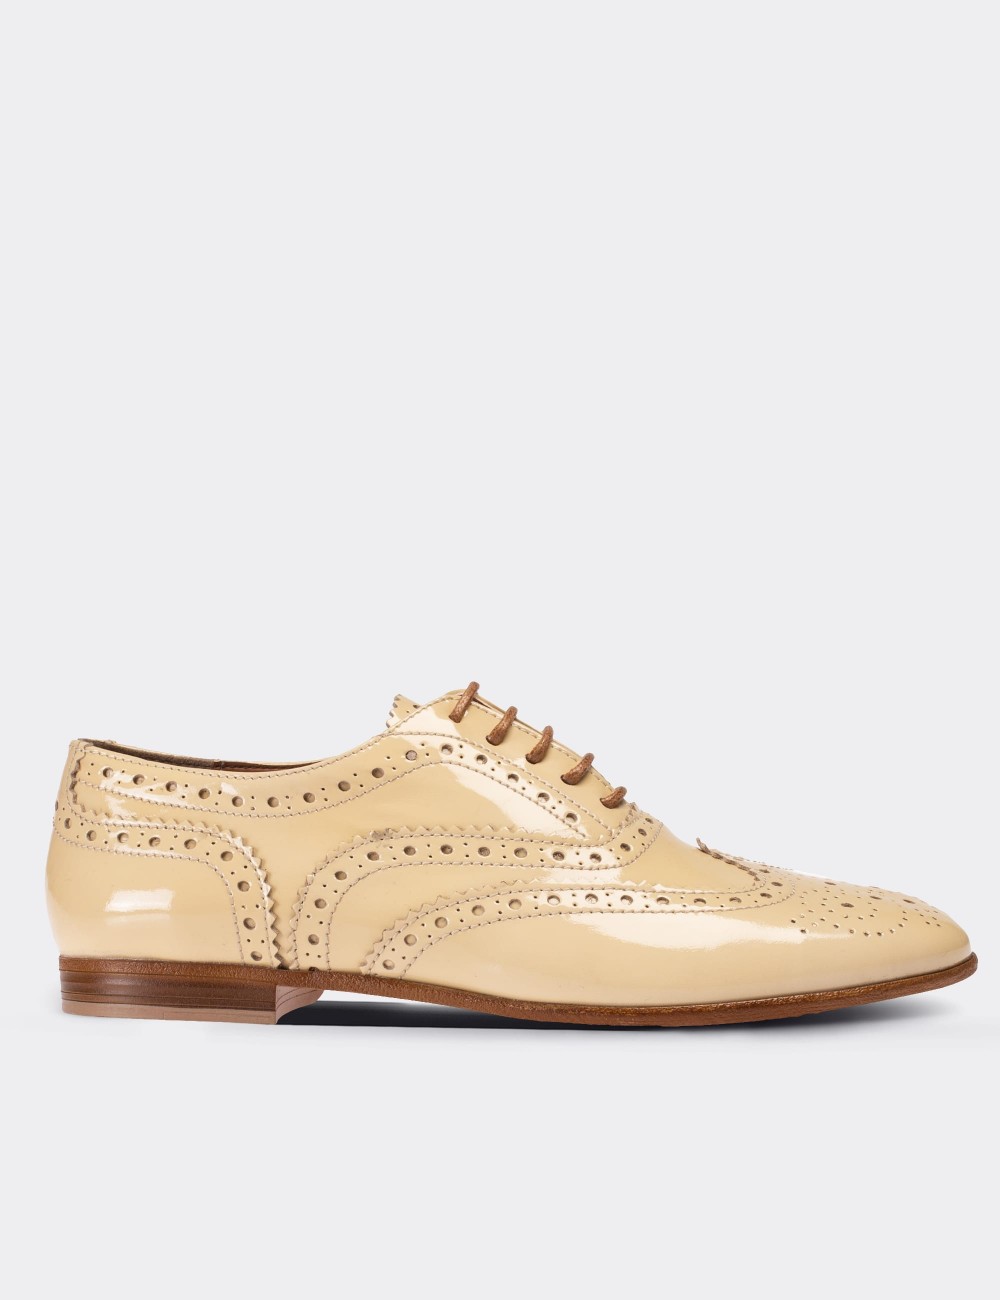 Beige Patent Leather Lace-up Shoes - 01418ZBEJC01